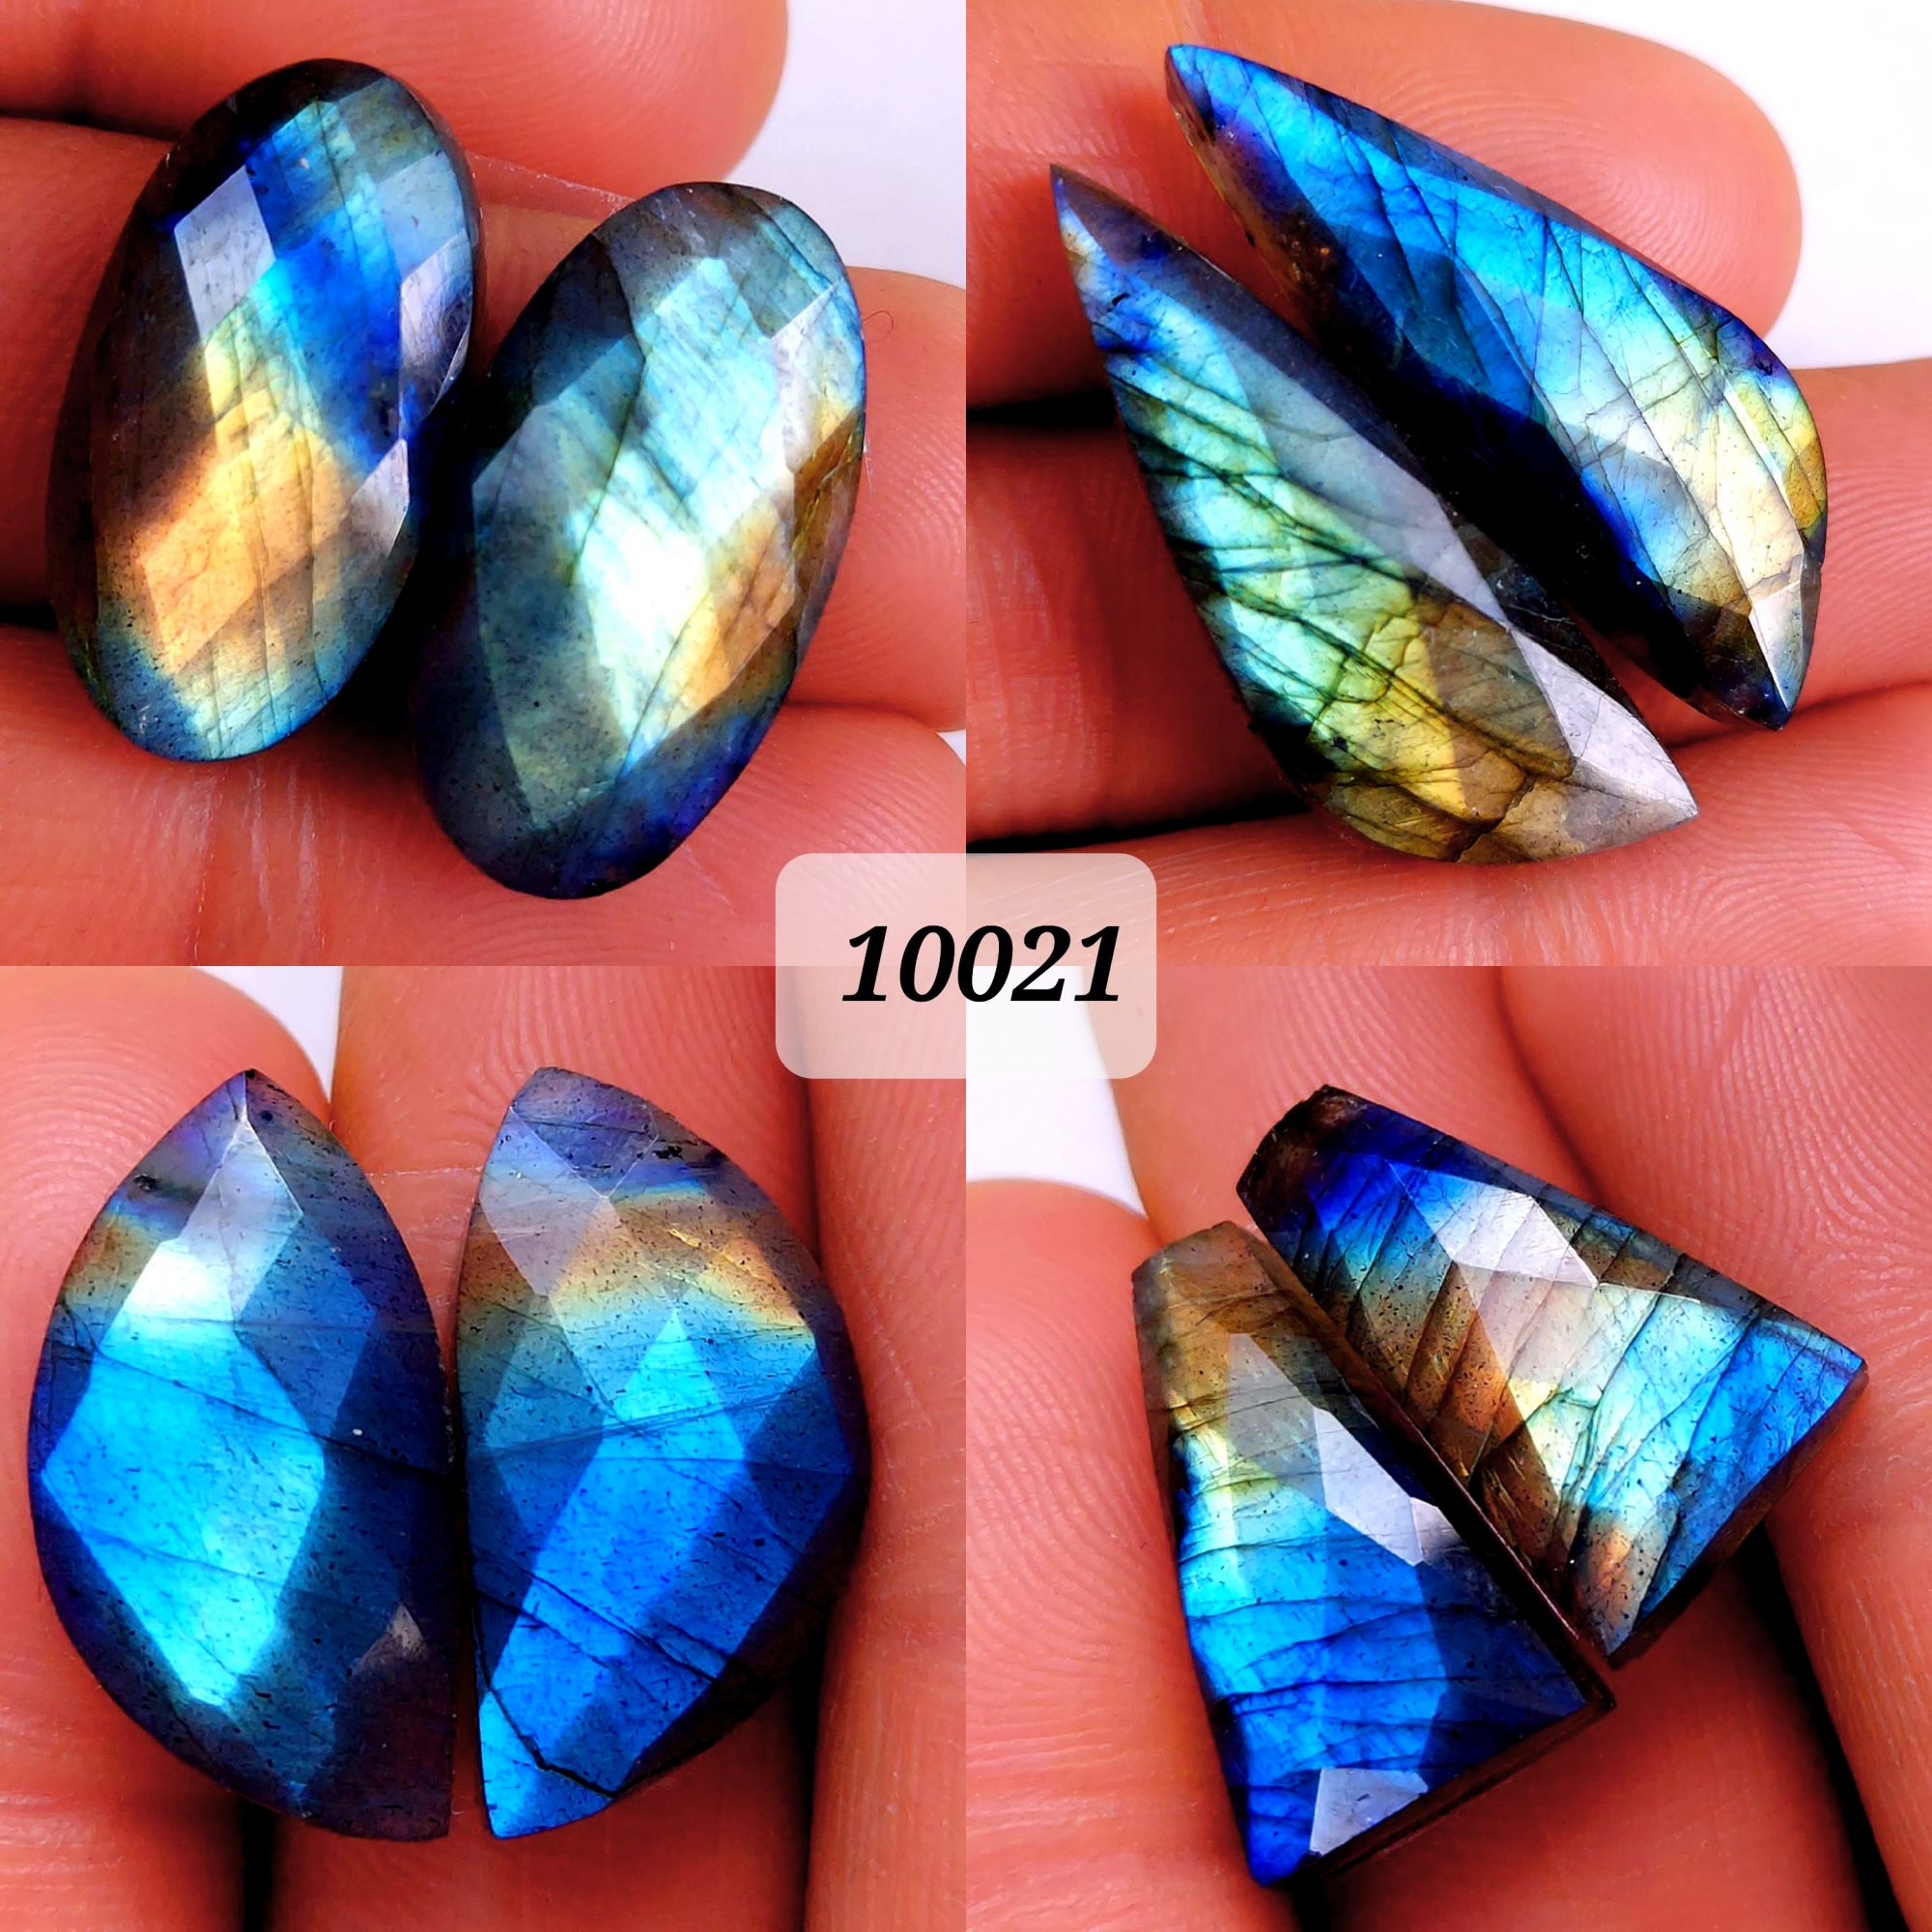 4Pair 108Cts Natural Labradorite Blue Fire Faceted Dangle Drop Earrings Semi Precious Crystal For Hoop Earrings Blue Gemstone Cabochon Matching pair 35x12 18x10mm #10021